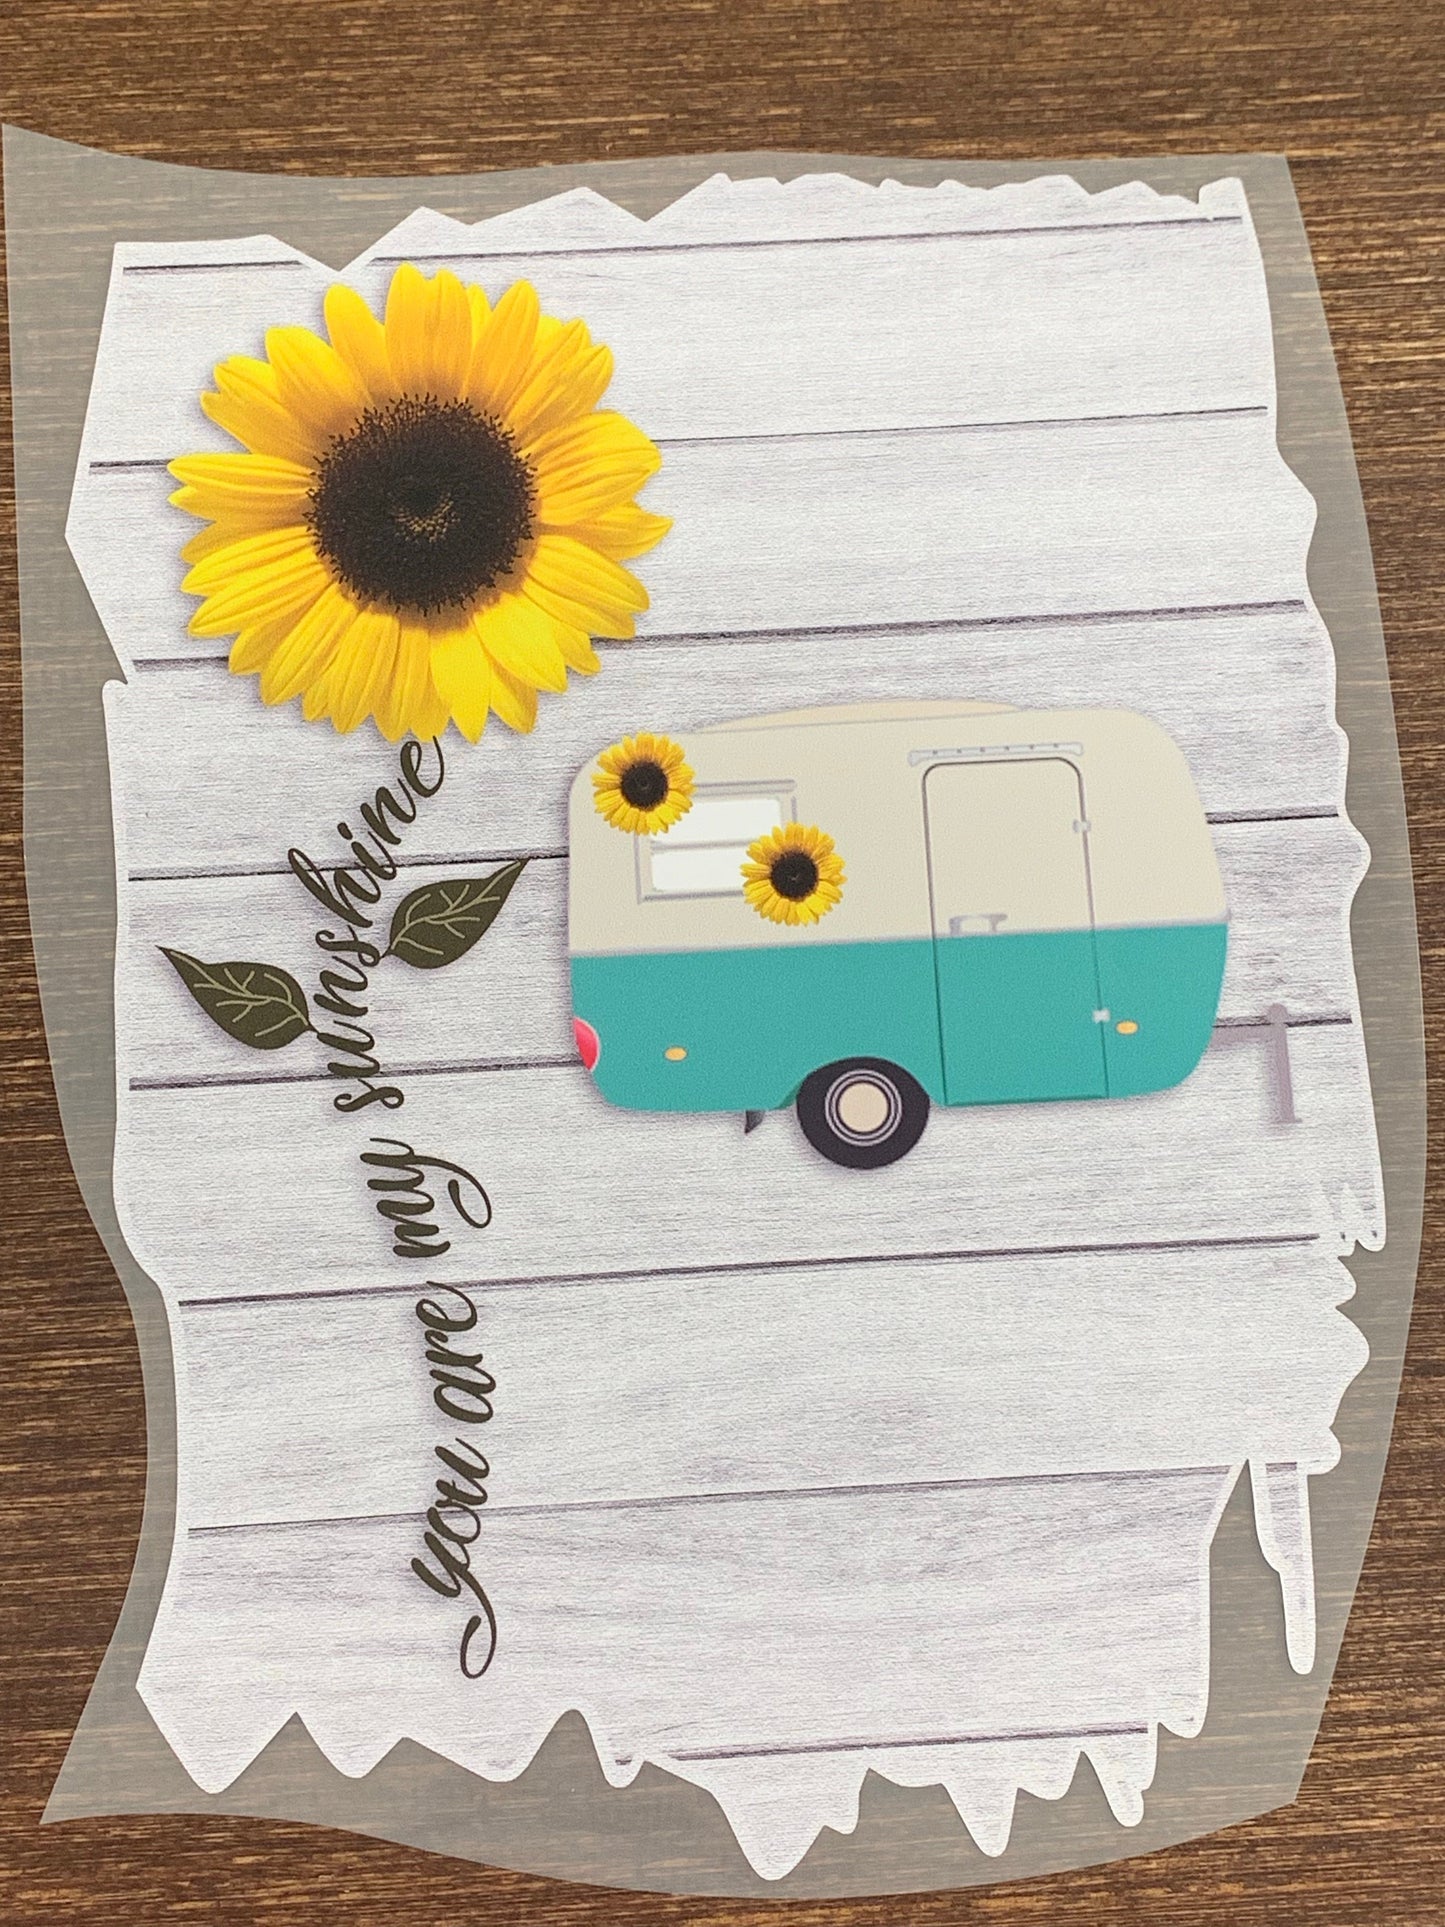 You are my sunshine trailer DTF TRANSFERPRINT TO ORDER